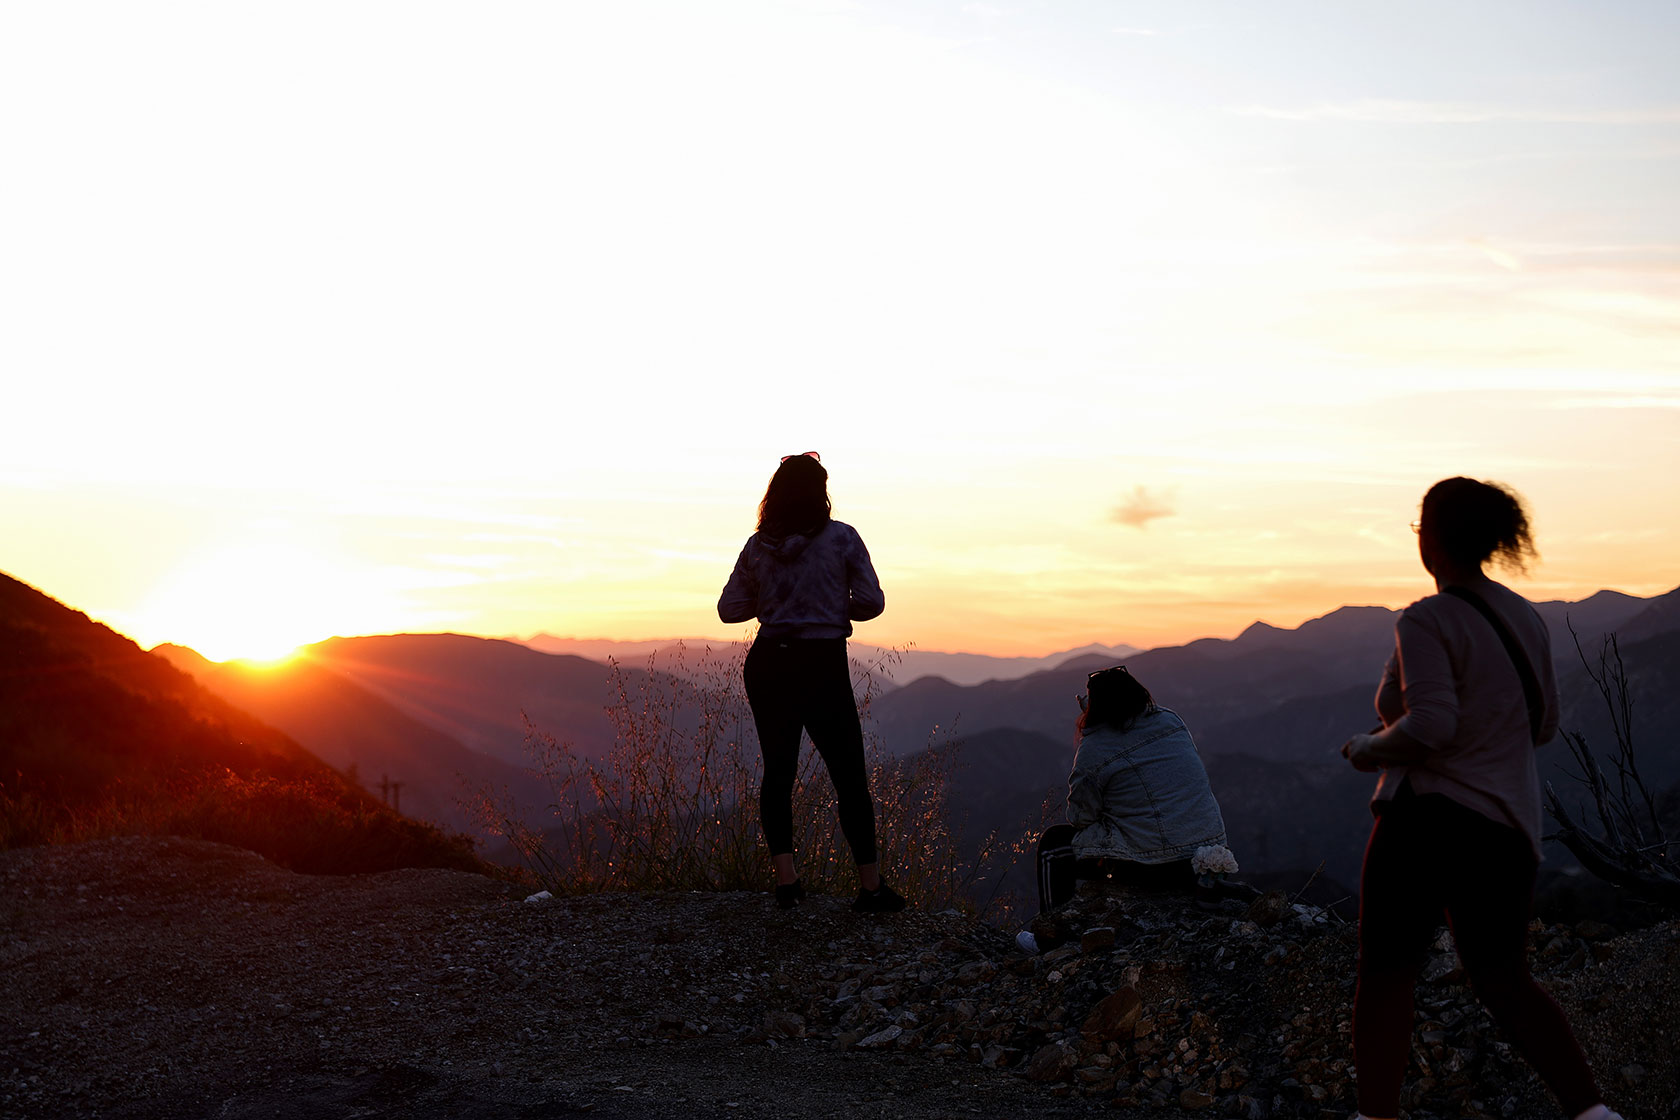 People view the sunset from a proposed expansion area of the San Gabriel Mountains National Monument.